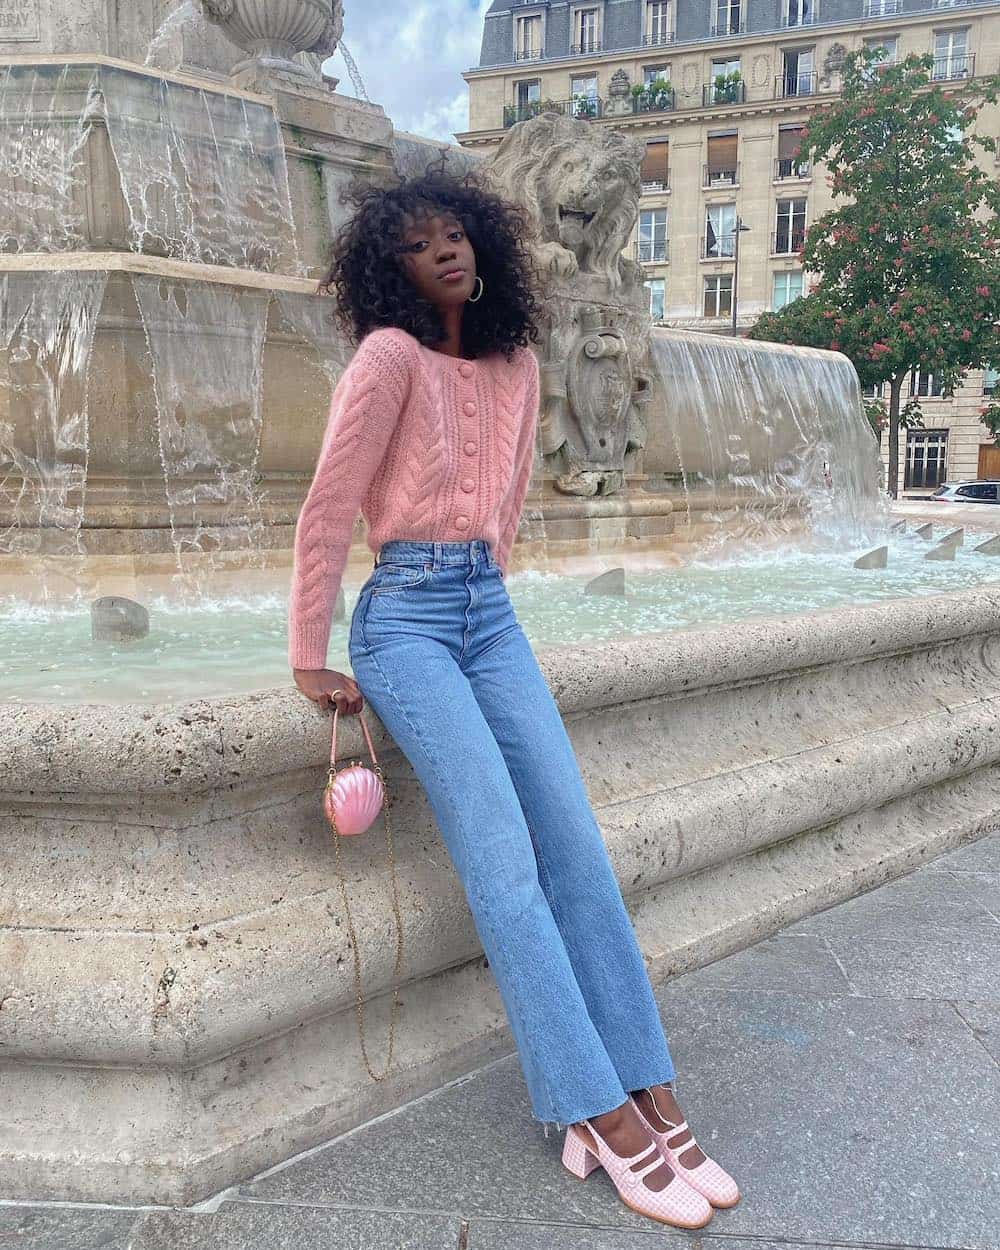 Black woman wearing a pink cardigan with light blue jeans and pink Mary Jane heels